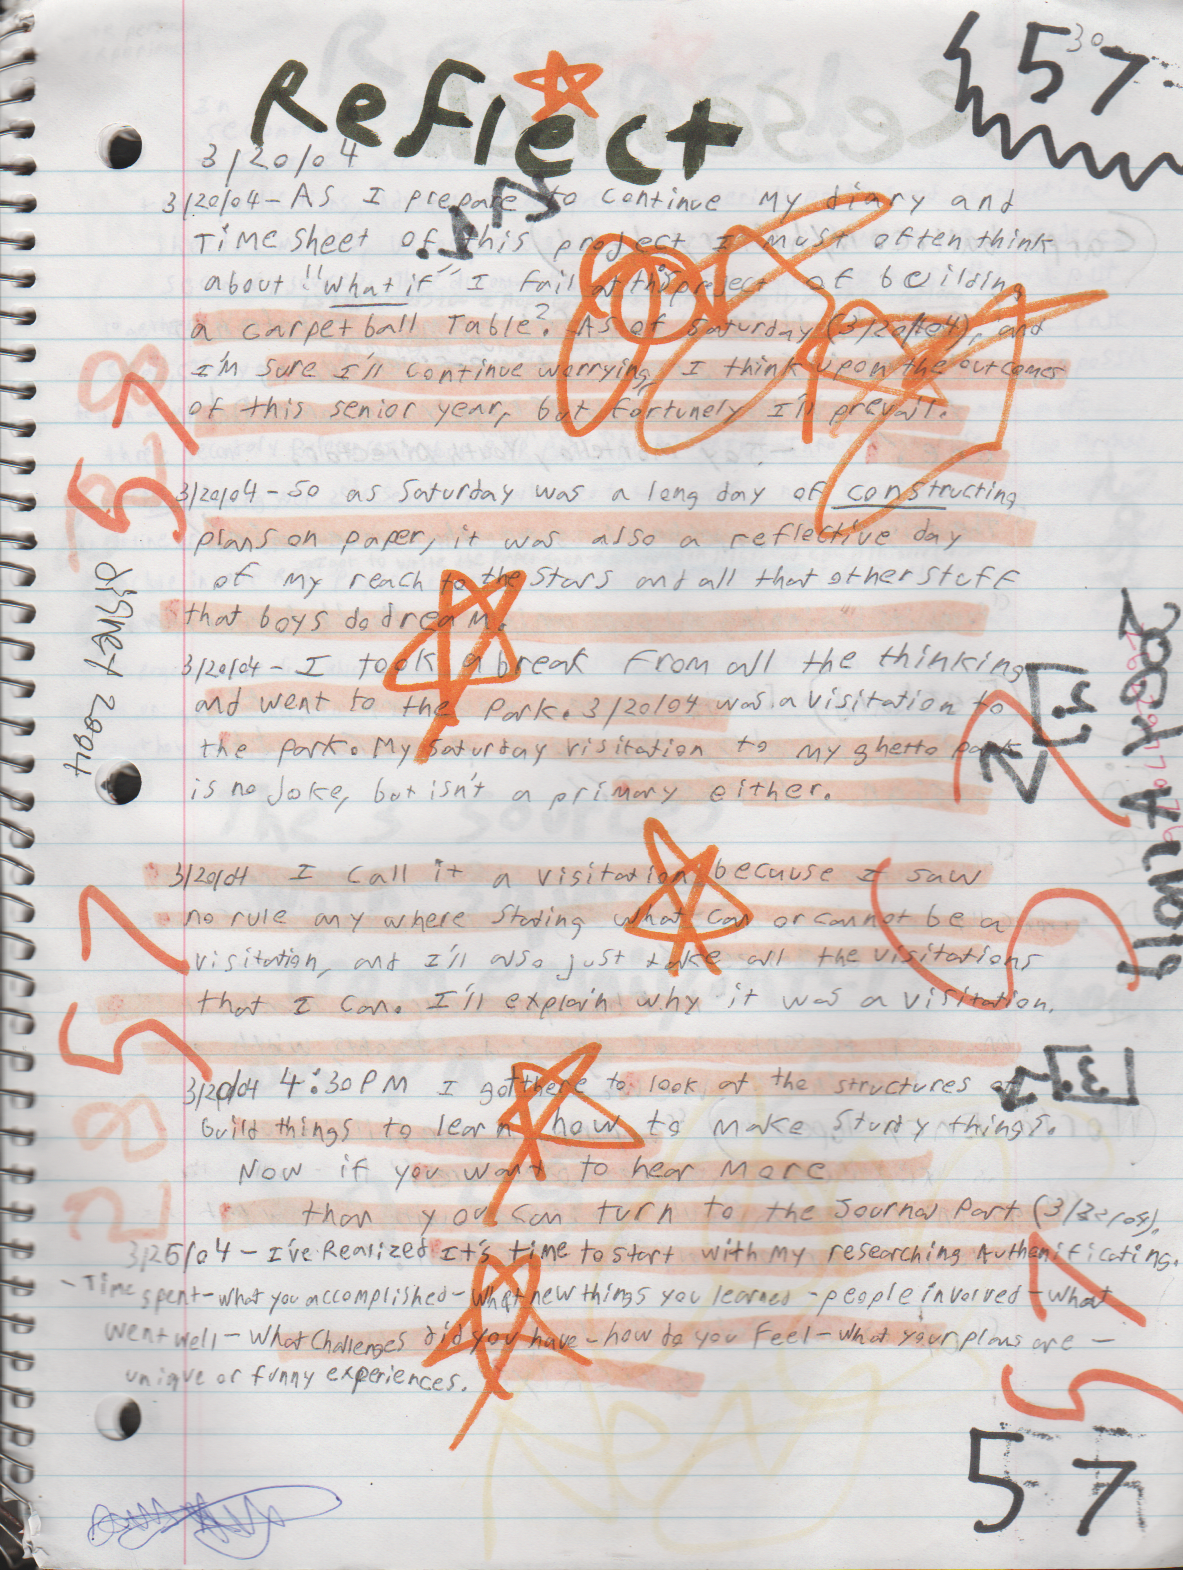 2004-01-29 - Thursday - Carpetball FGHS Senior Project Journal, Joey Arnold, Part 02, 96pages numbered, Notebook-55.png